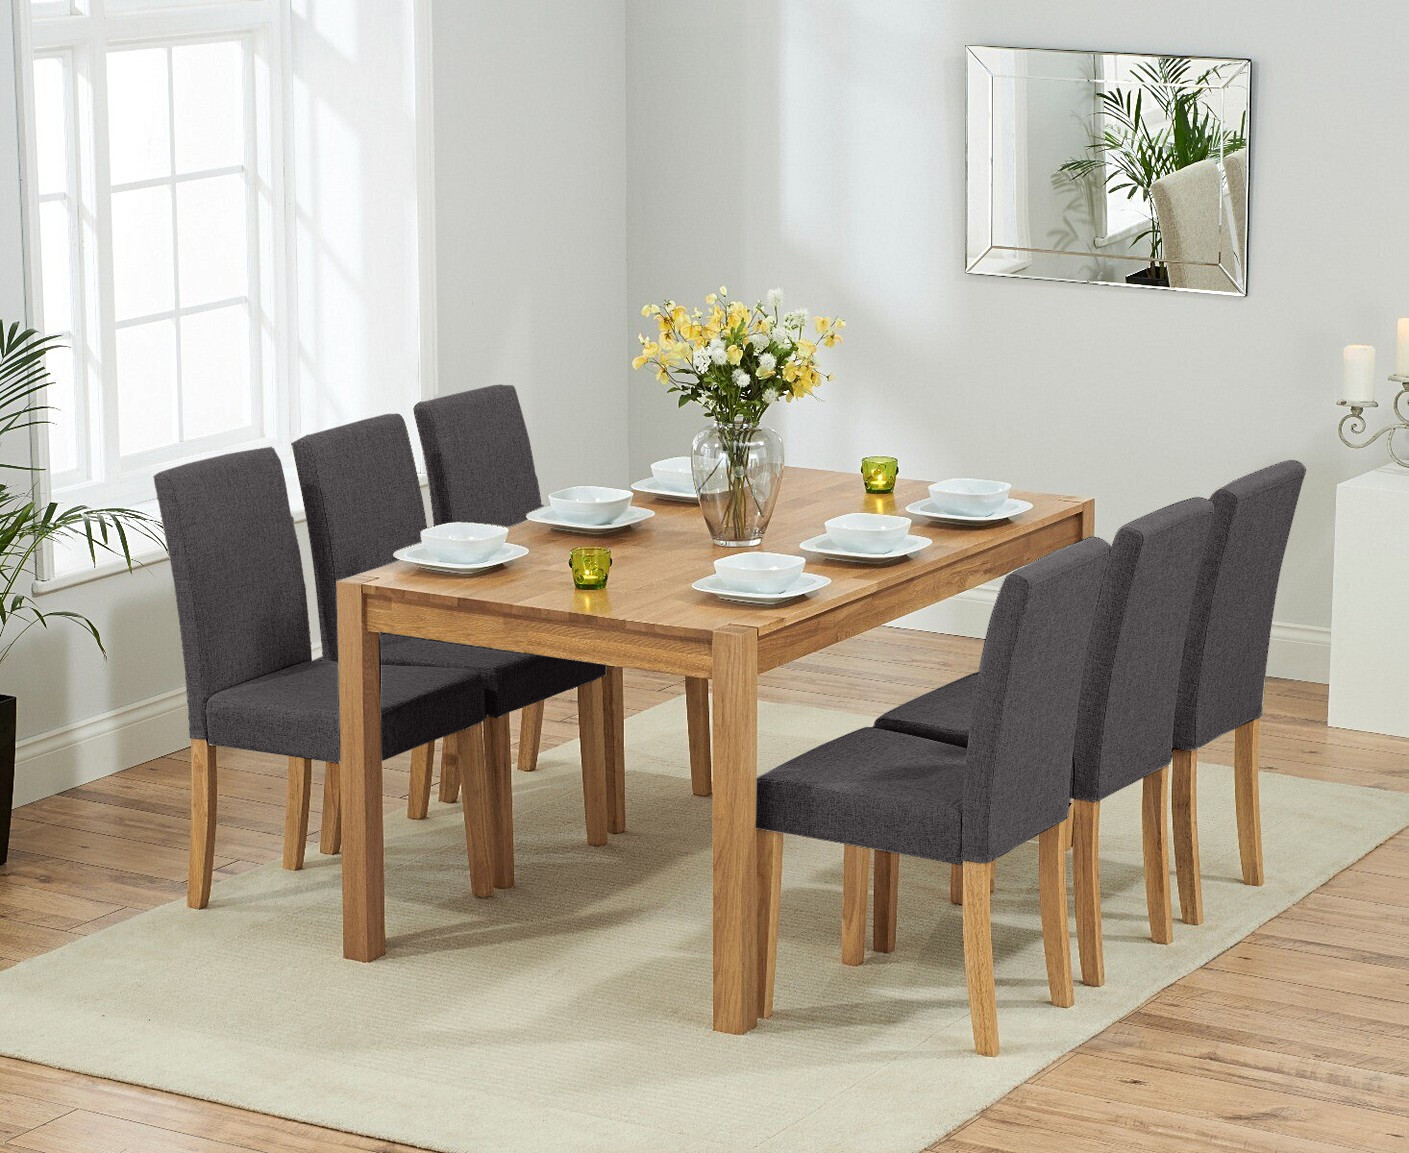 Photo 2 of York 150cm solid oak dining table with 8 charcoal lila chairs